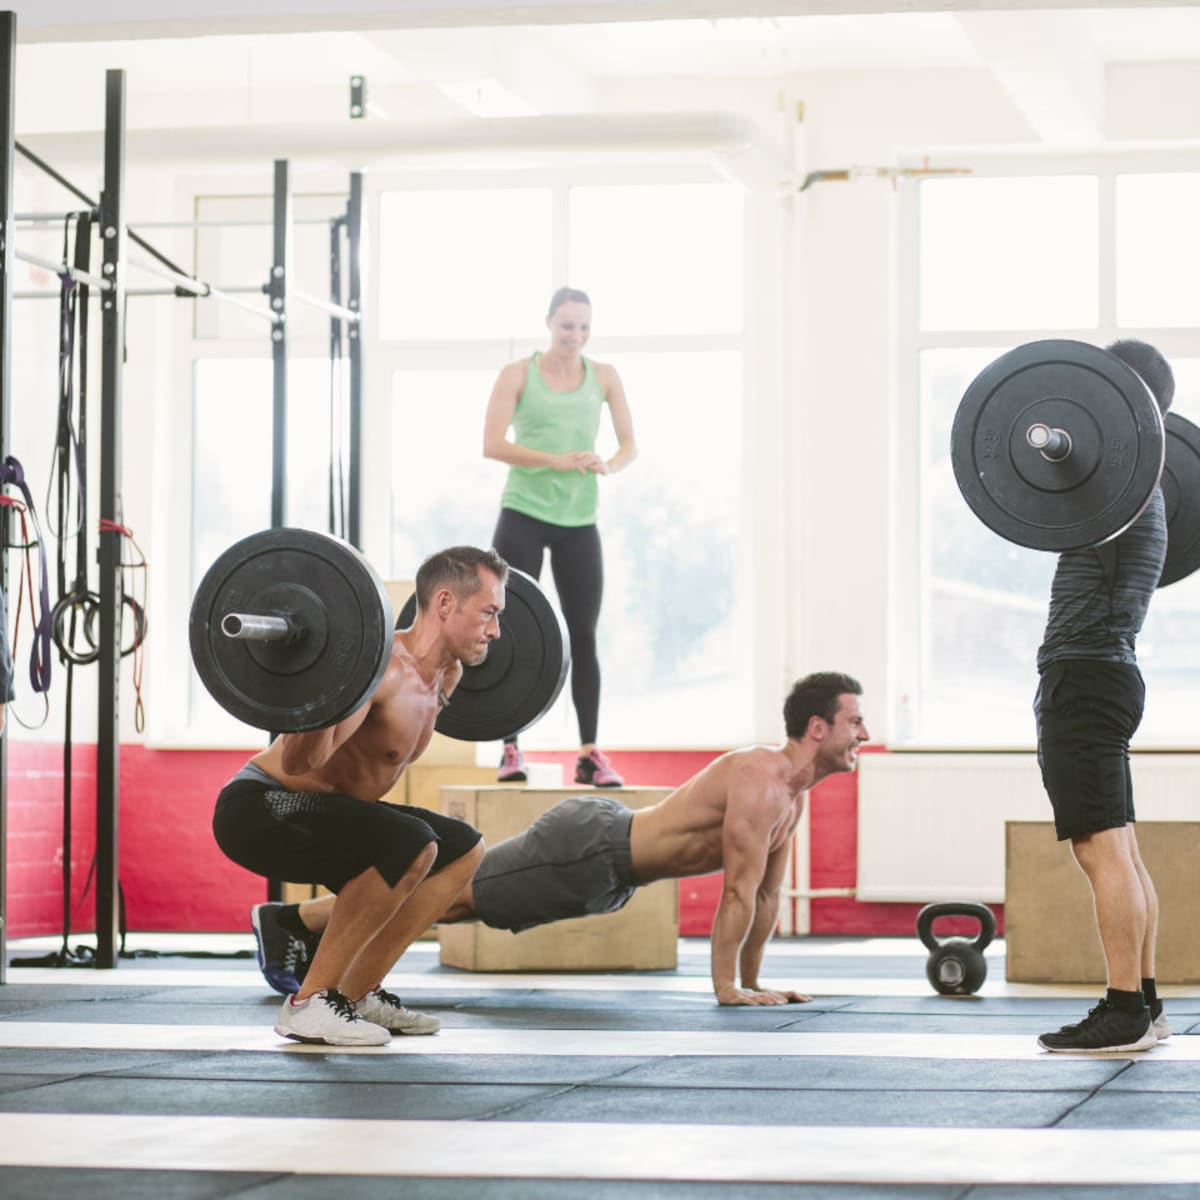 5 ways to get your full workout in a packed gym